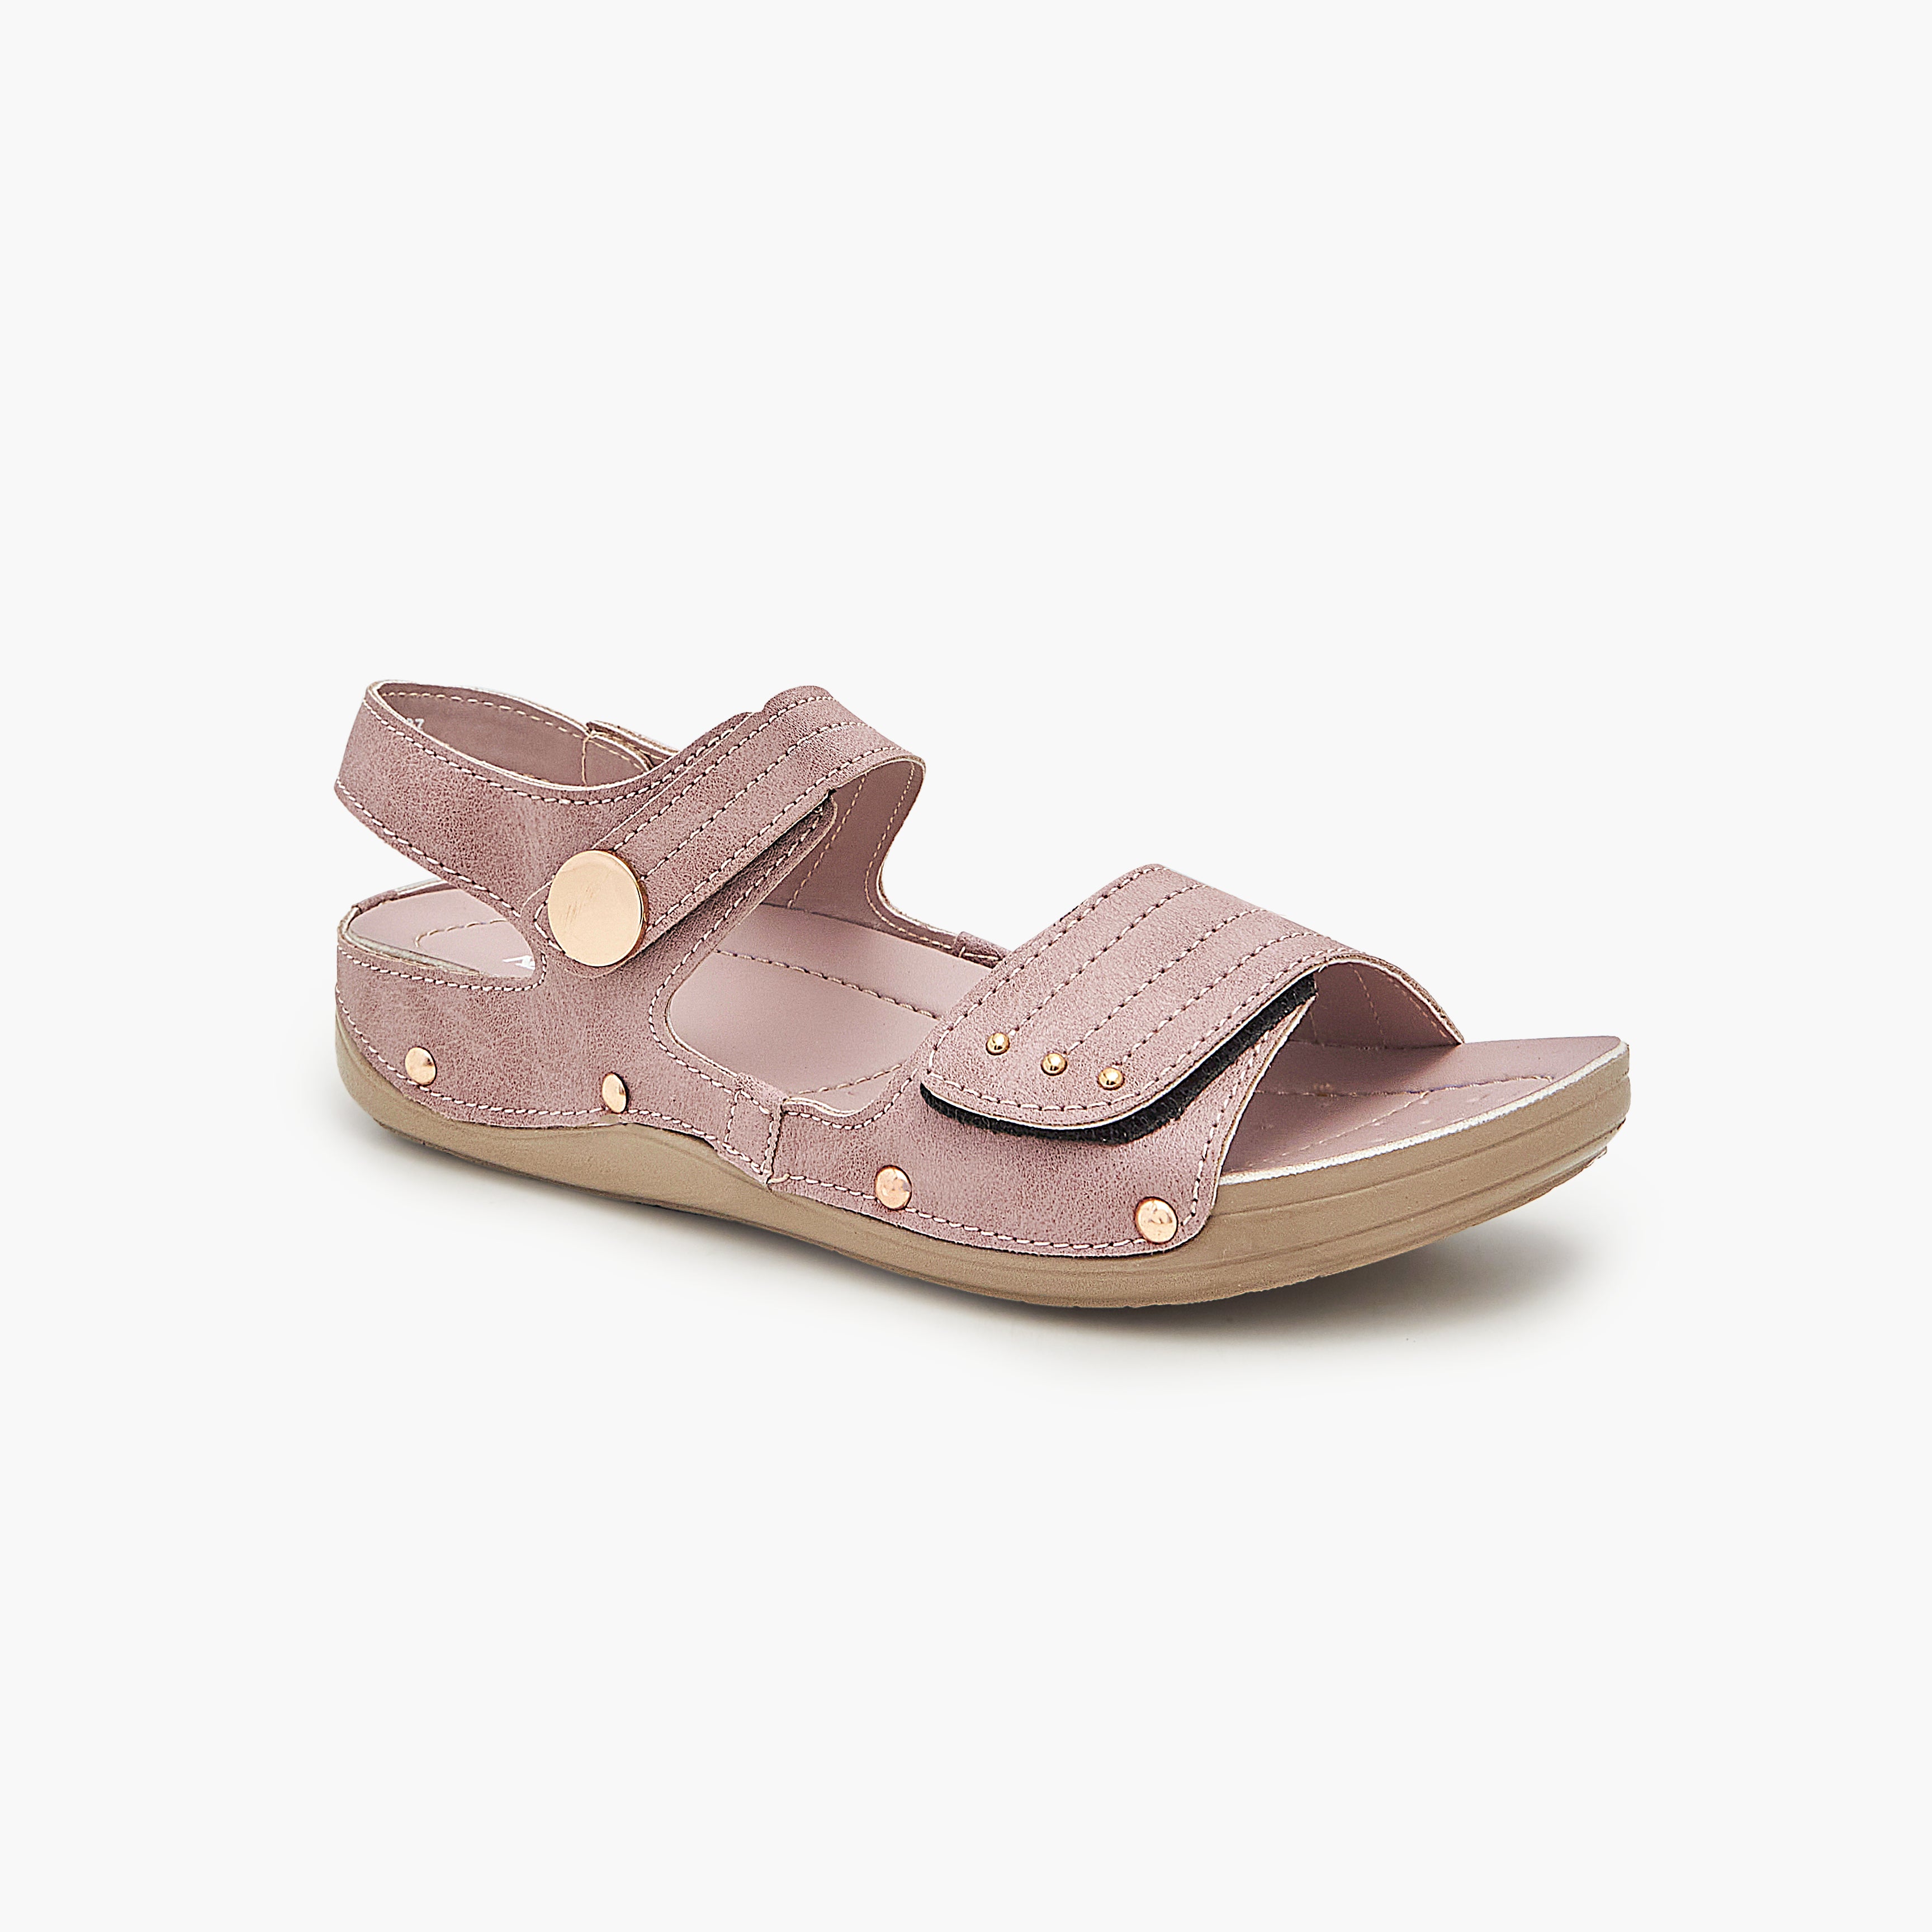 Buy LILAC – Womens Sandals Comfortable